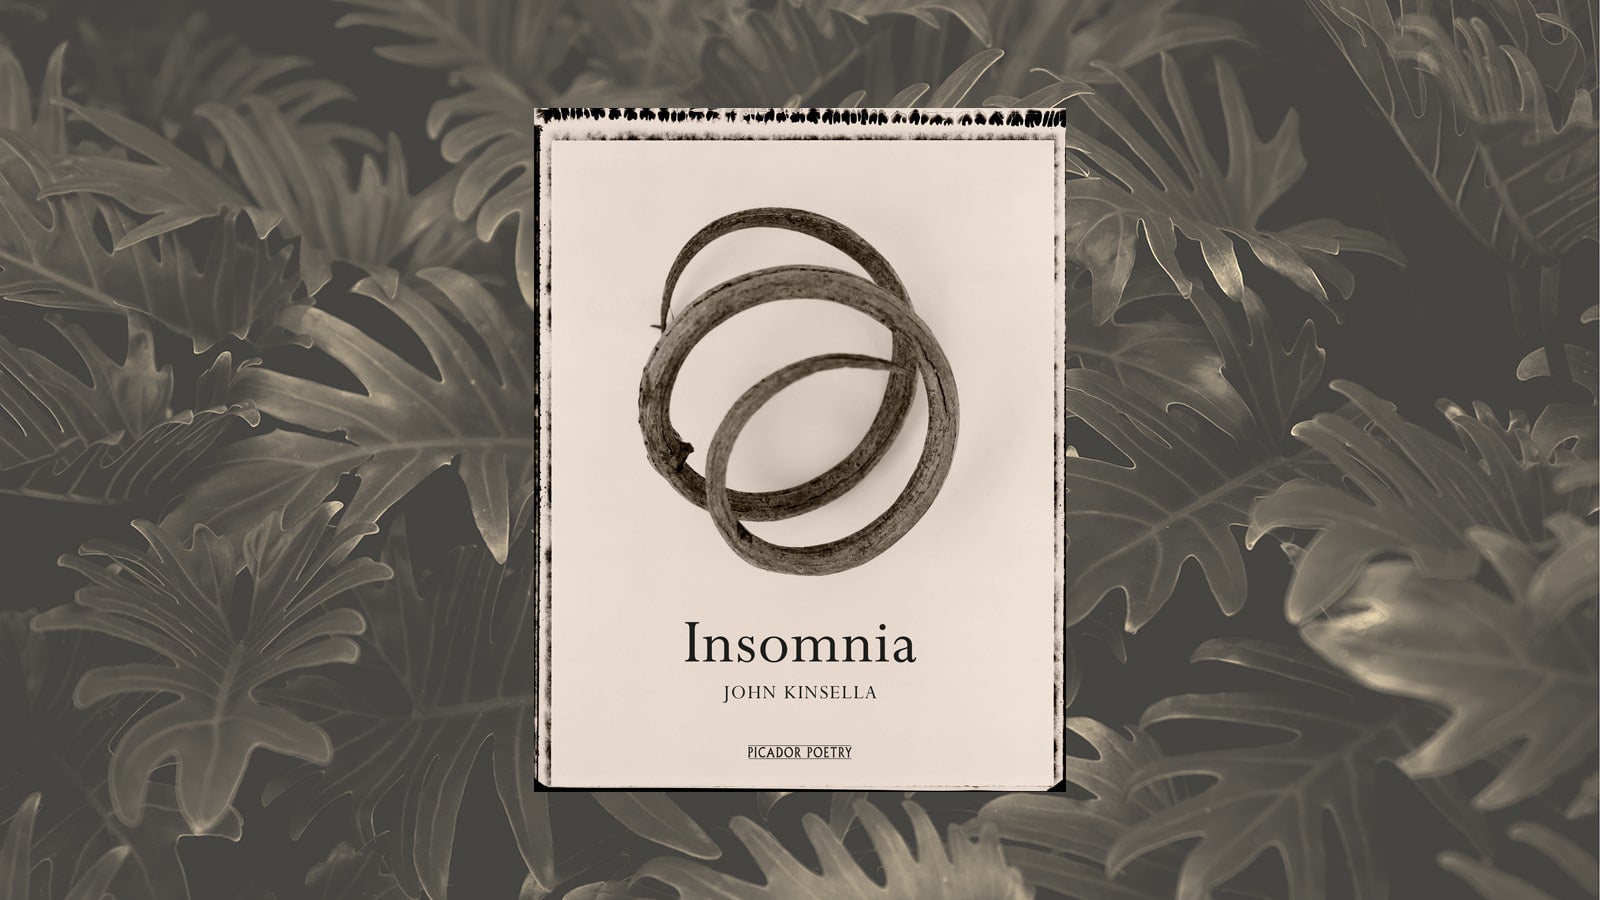 The cover for John Kinsella's poetry collection Insomnia set against a sepia-tinged background of leaves